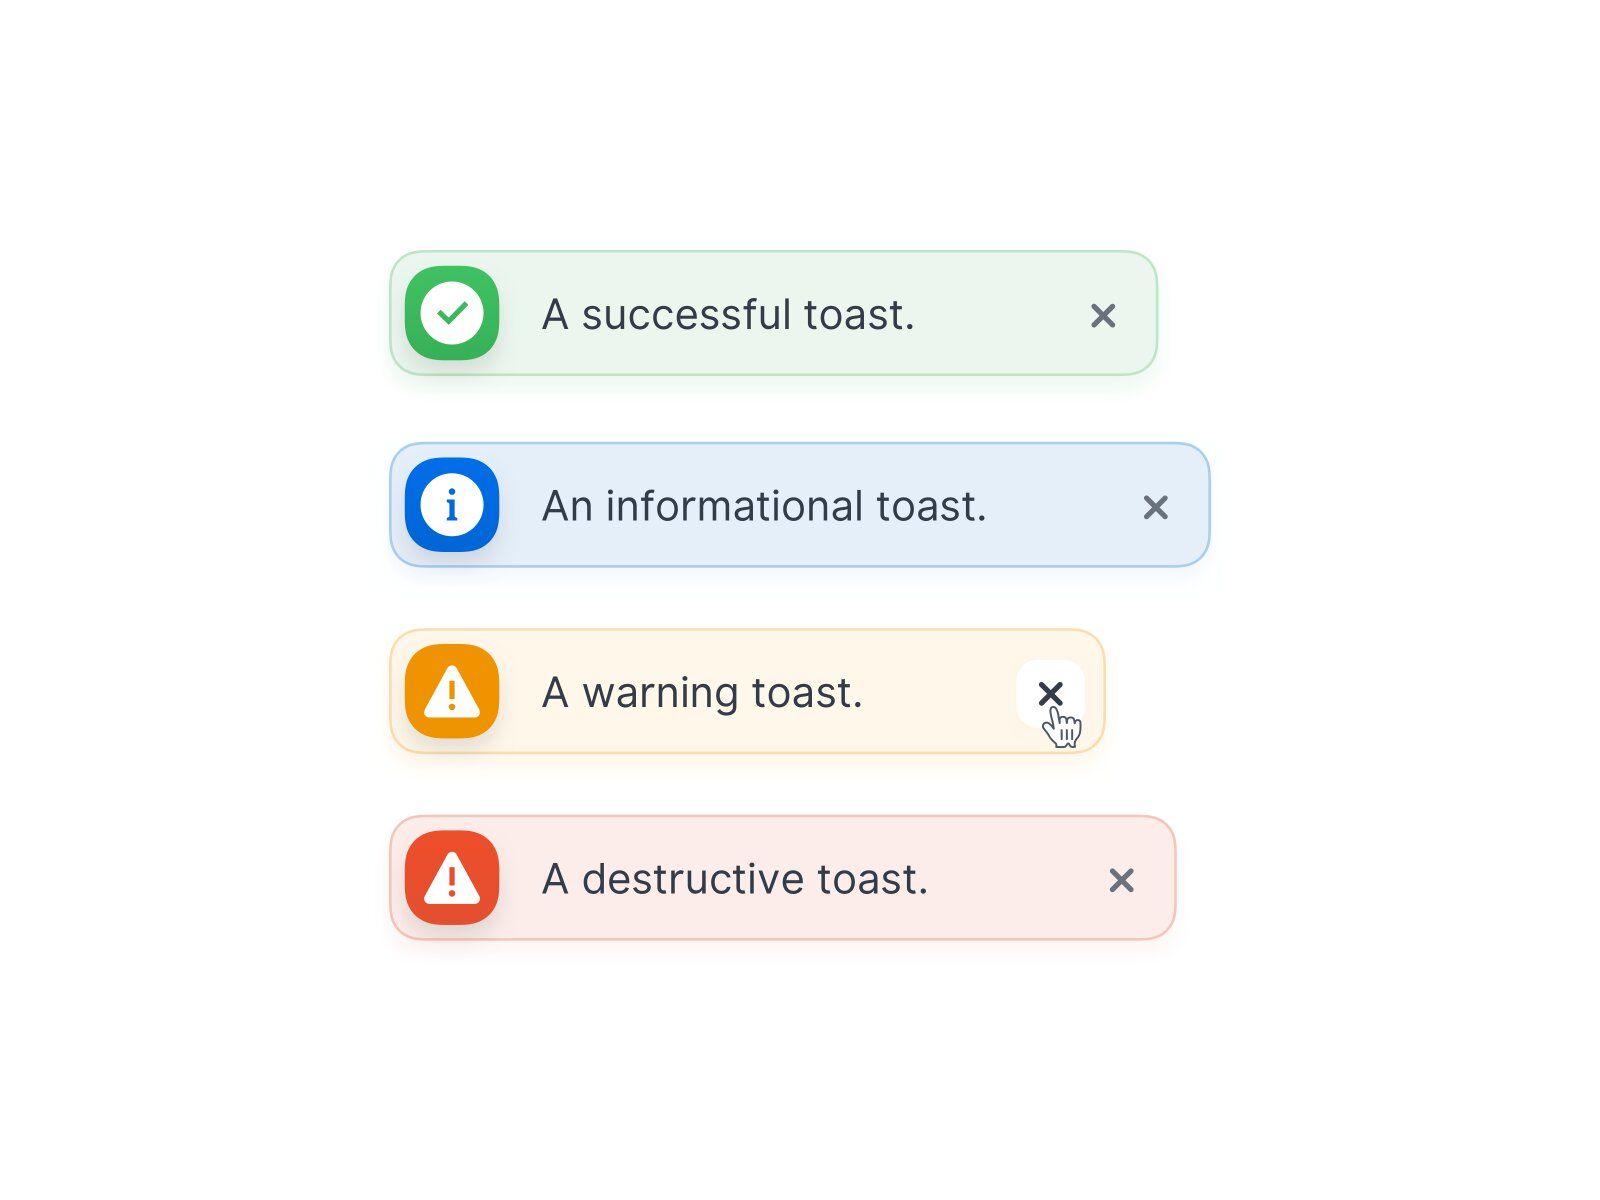 Smart home systems for IoT devices should have the push-notification feature (*image by [Antonin Kus](https://dribbble.com/tondakus){ rel="nofollow" target="_blank" .default-md}*)